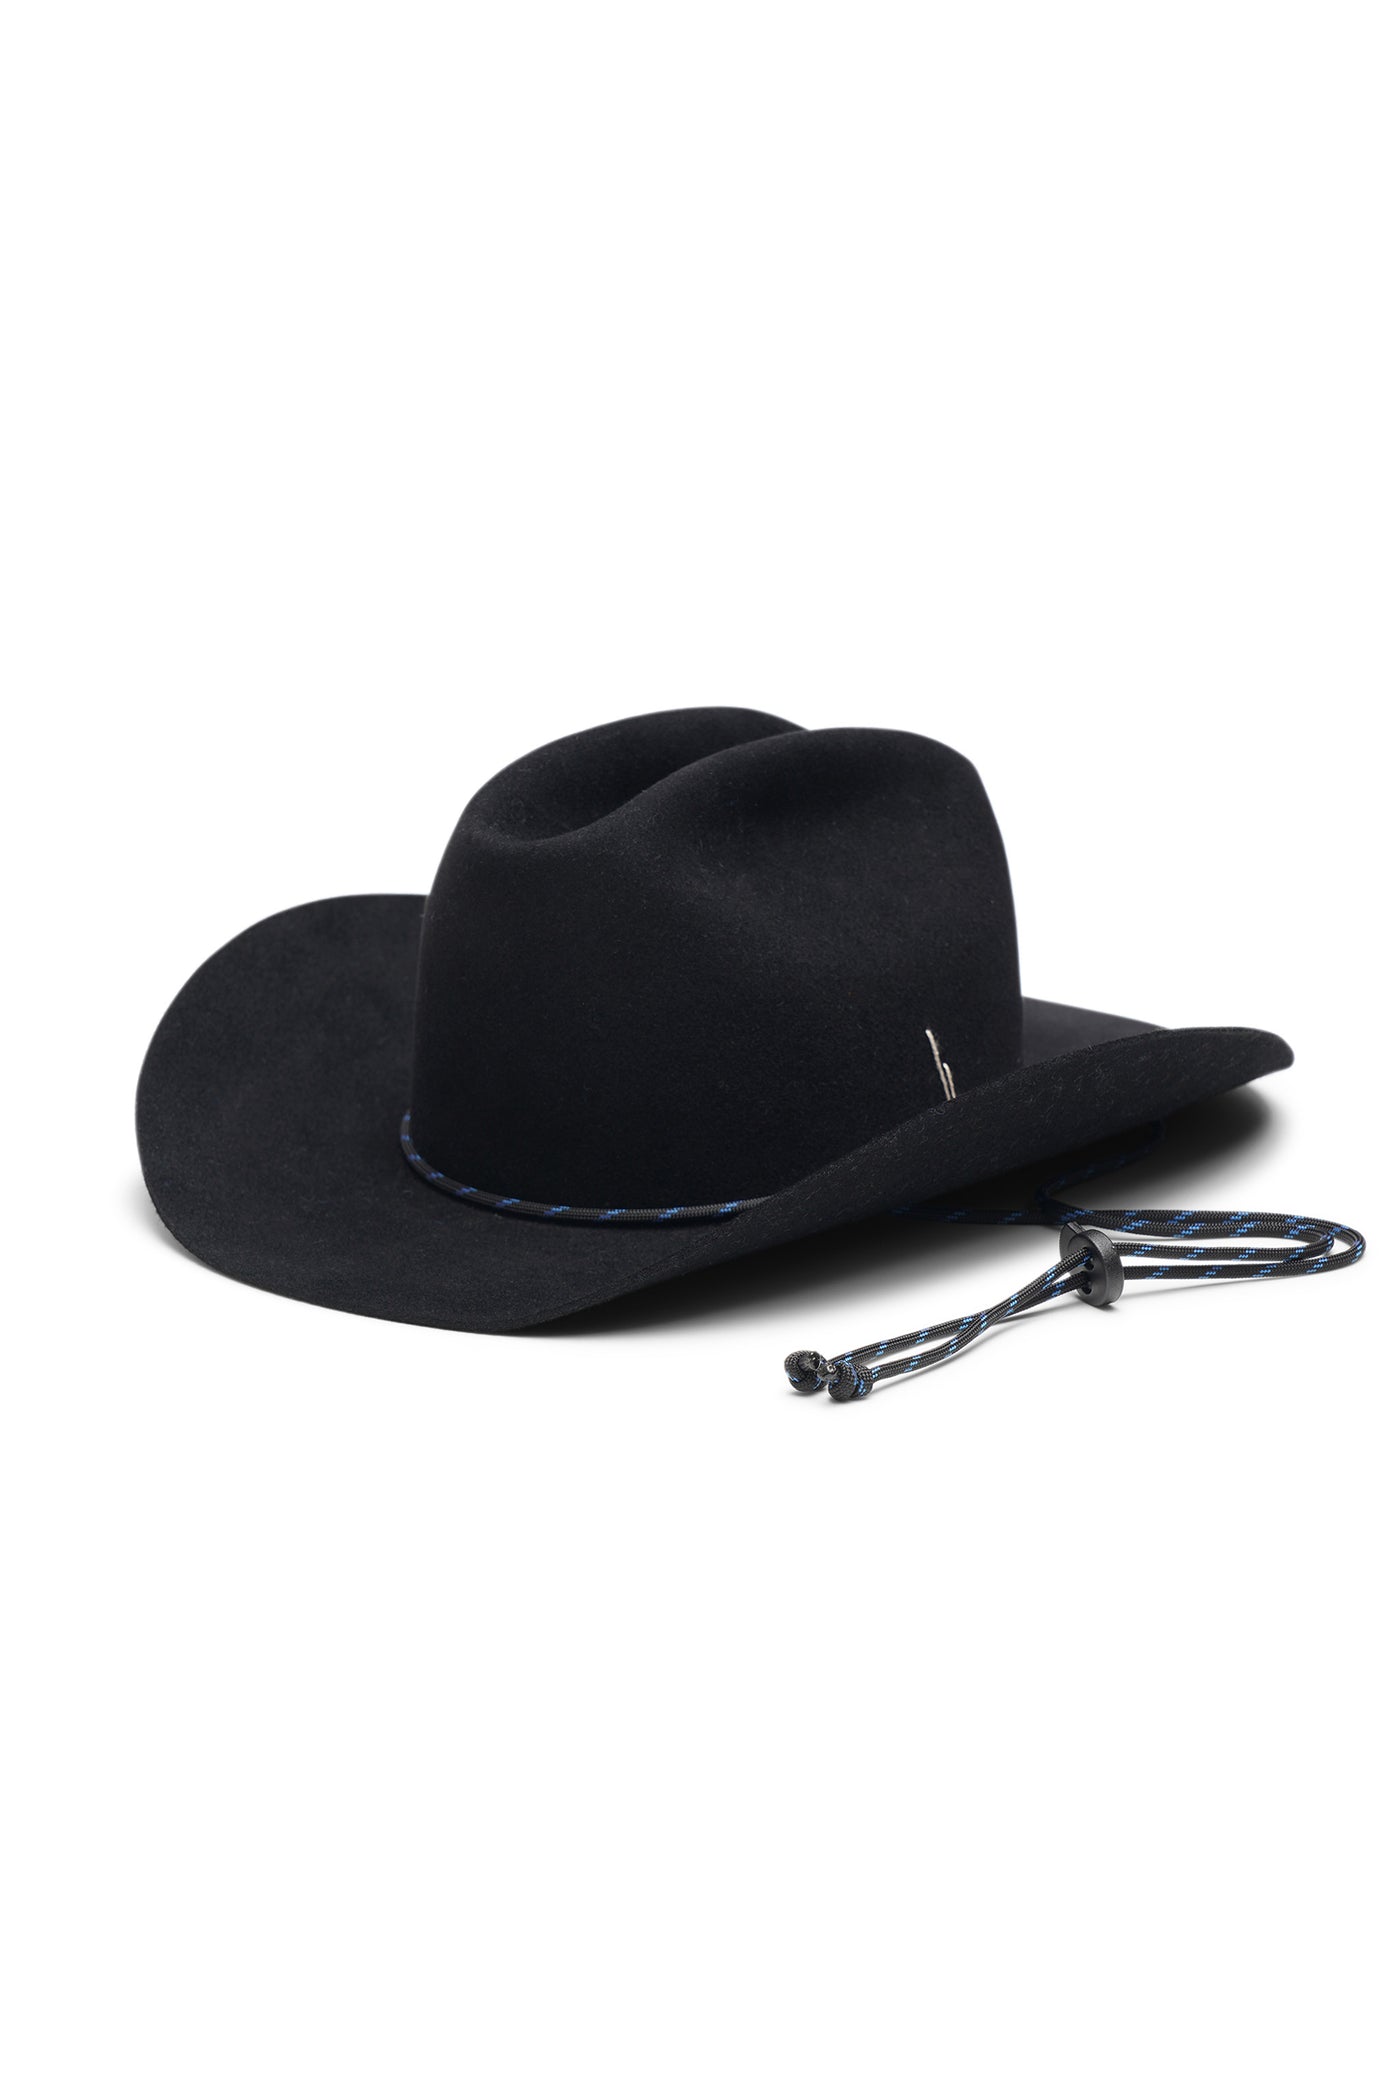 Black cowboy 100% fur felt hat with a wide brim and center crease. Reflective paracord chin strap detail in black. Unisex hat style in various sizes and colors. We ship worldwide. Shop now. Each SoonNoon hat is handmade with unique character in Stockholm, Sweden.